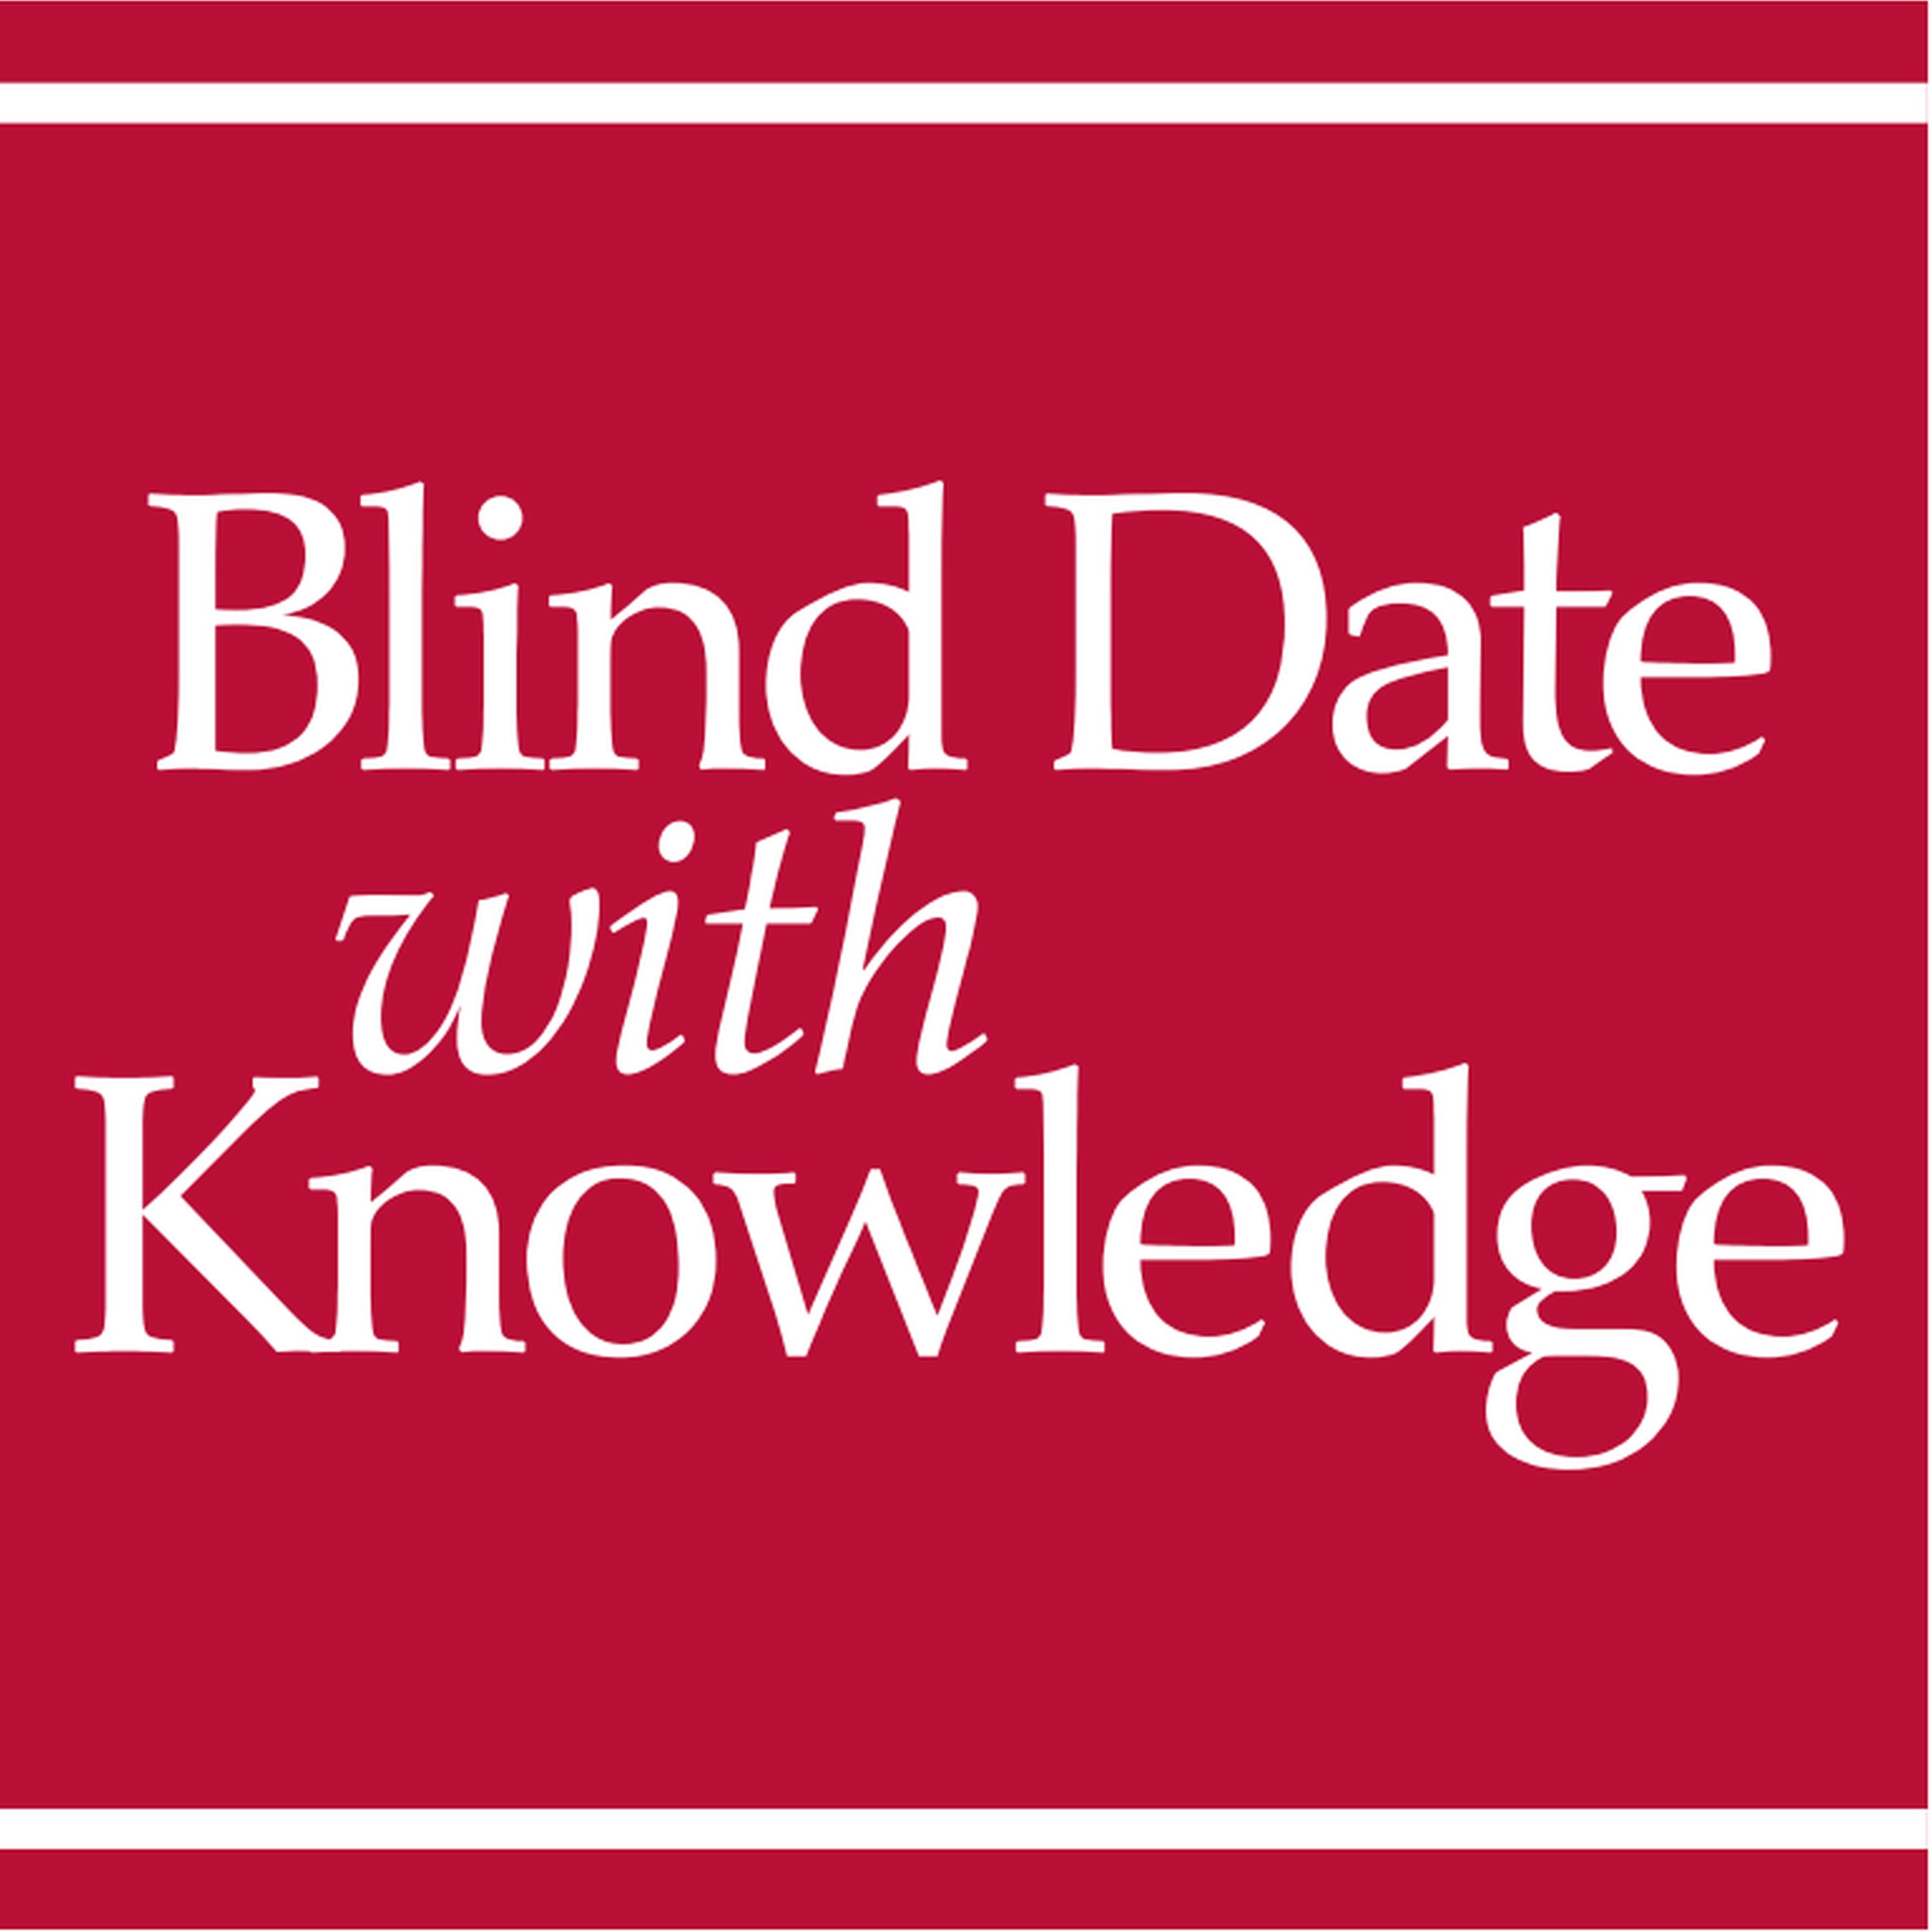 Blind Date with Knowledge